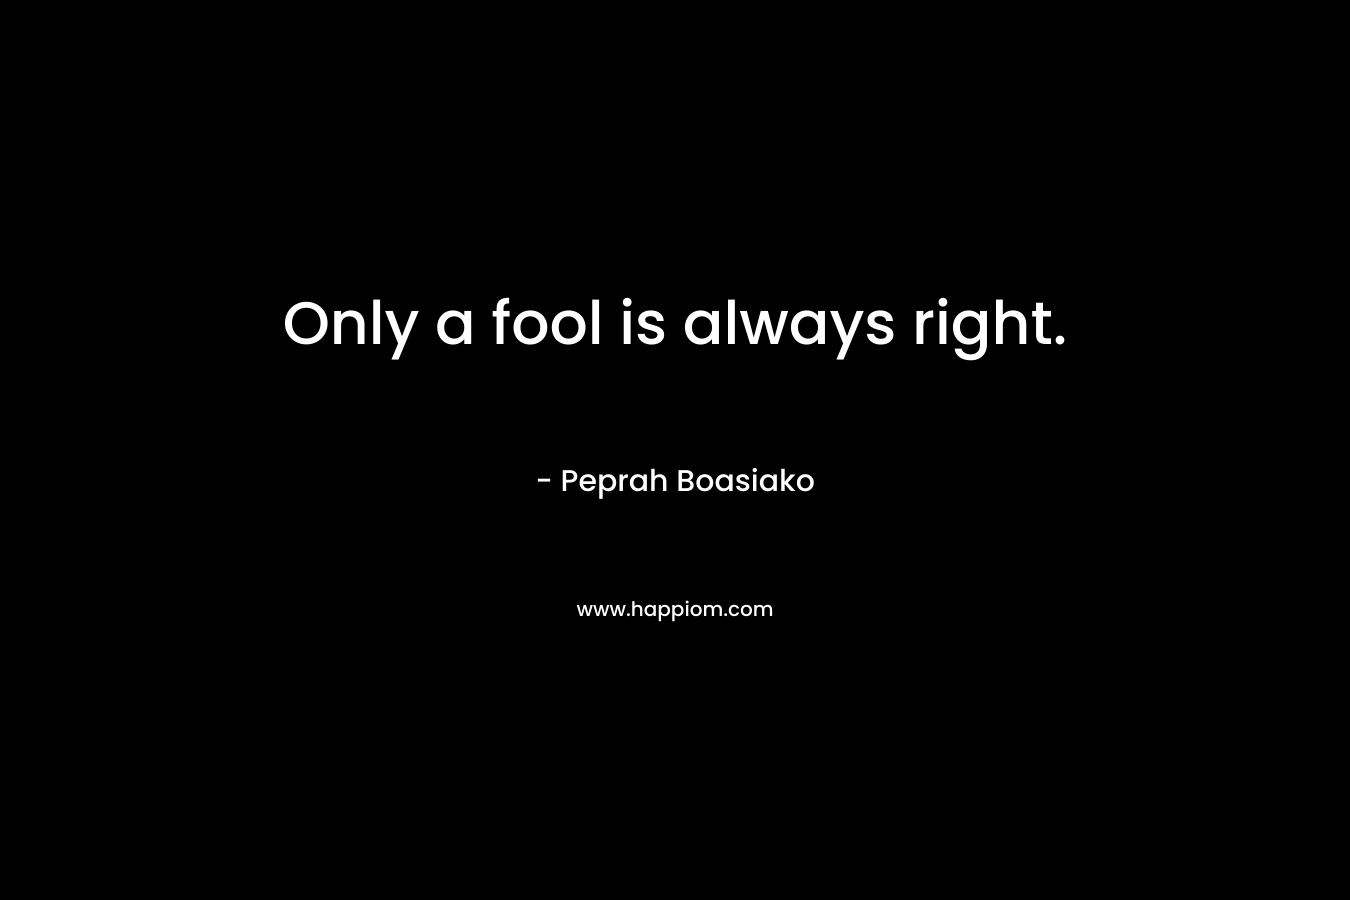 Only a fool is always right.